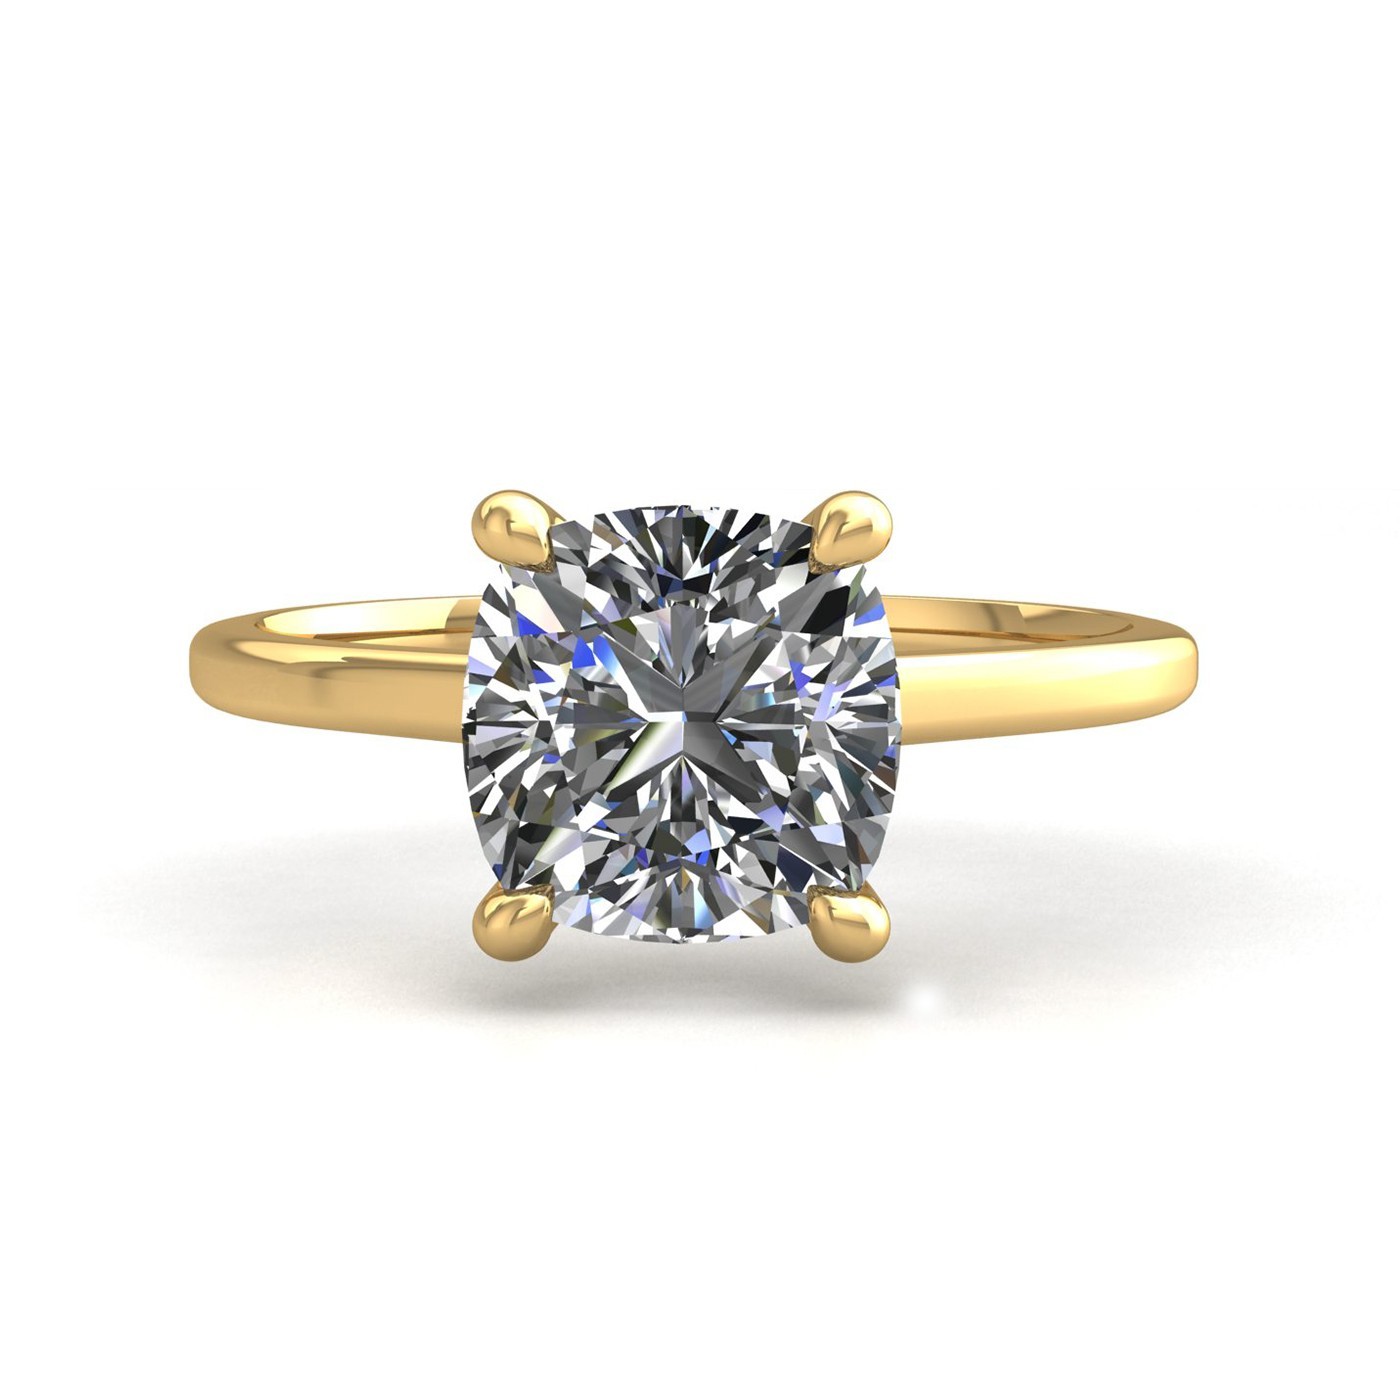 18k yellow gold  0,30 ct 4 prongs solitaire cushion cut diamond engagement ring with whisper thin band Photos & images